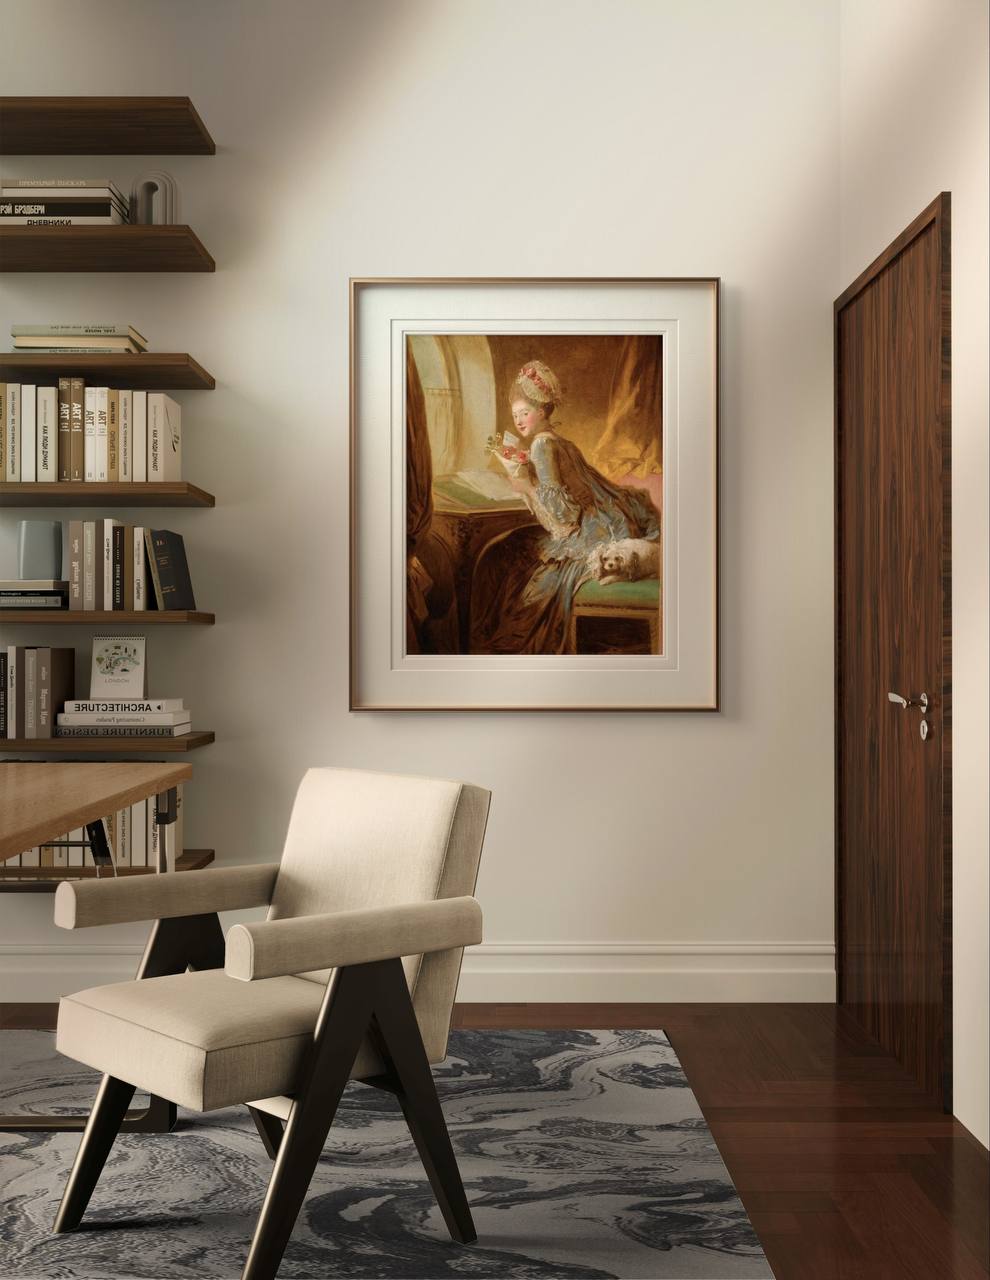 Rococó Art.  The primary colors are orange, gold, and soft pastels, evoking a sense of historical charm and elegance. This poster print is an exquisite addition to any home decor. Keywords: Wall Art, home decor, painting, art reproduction, famous artist, Poster, print, Jean-Honoré Fragonard, The Love Letter.